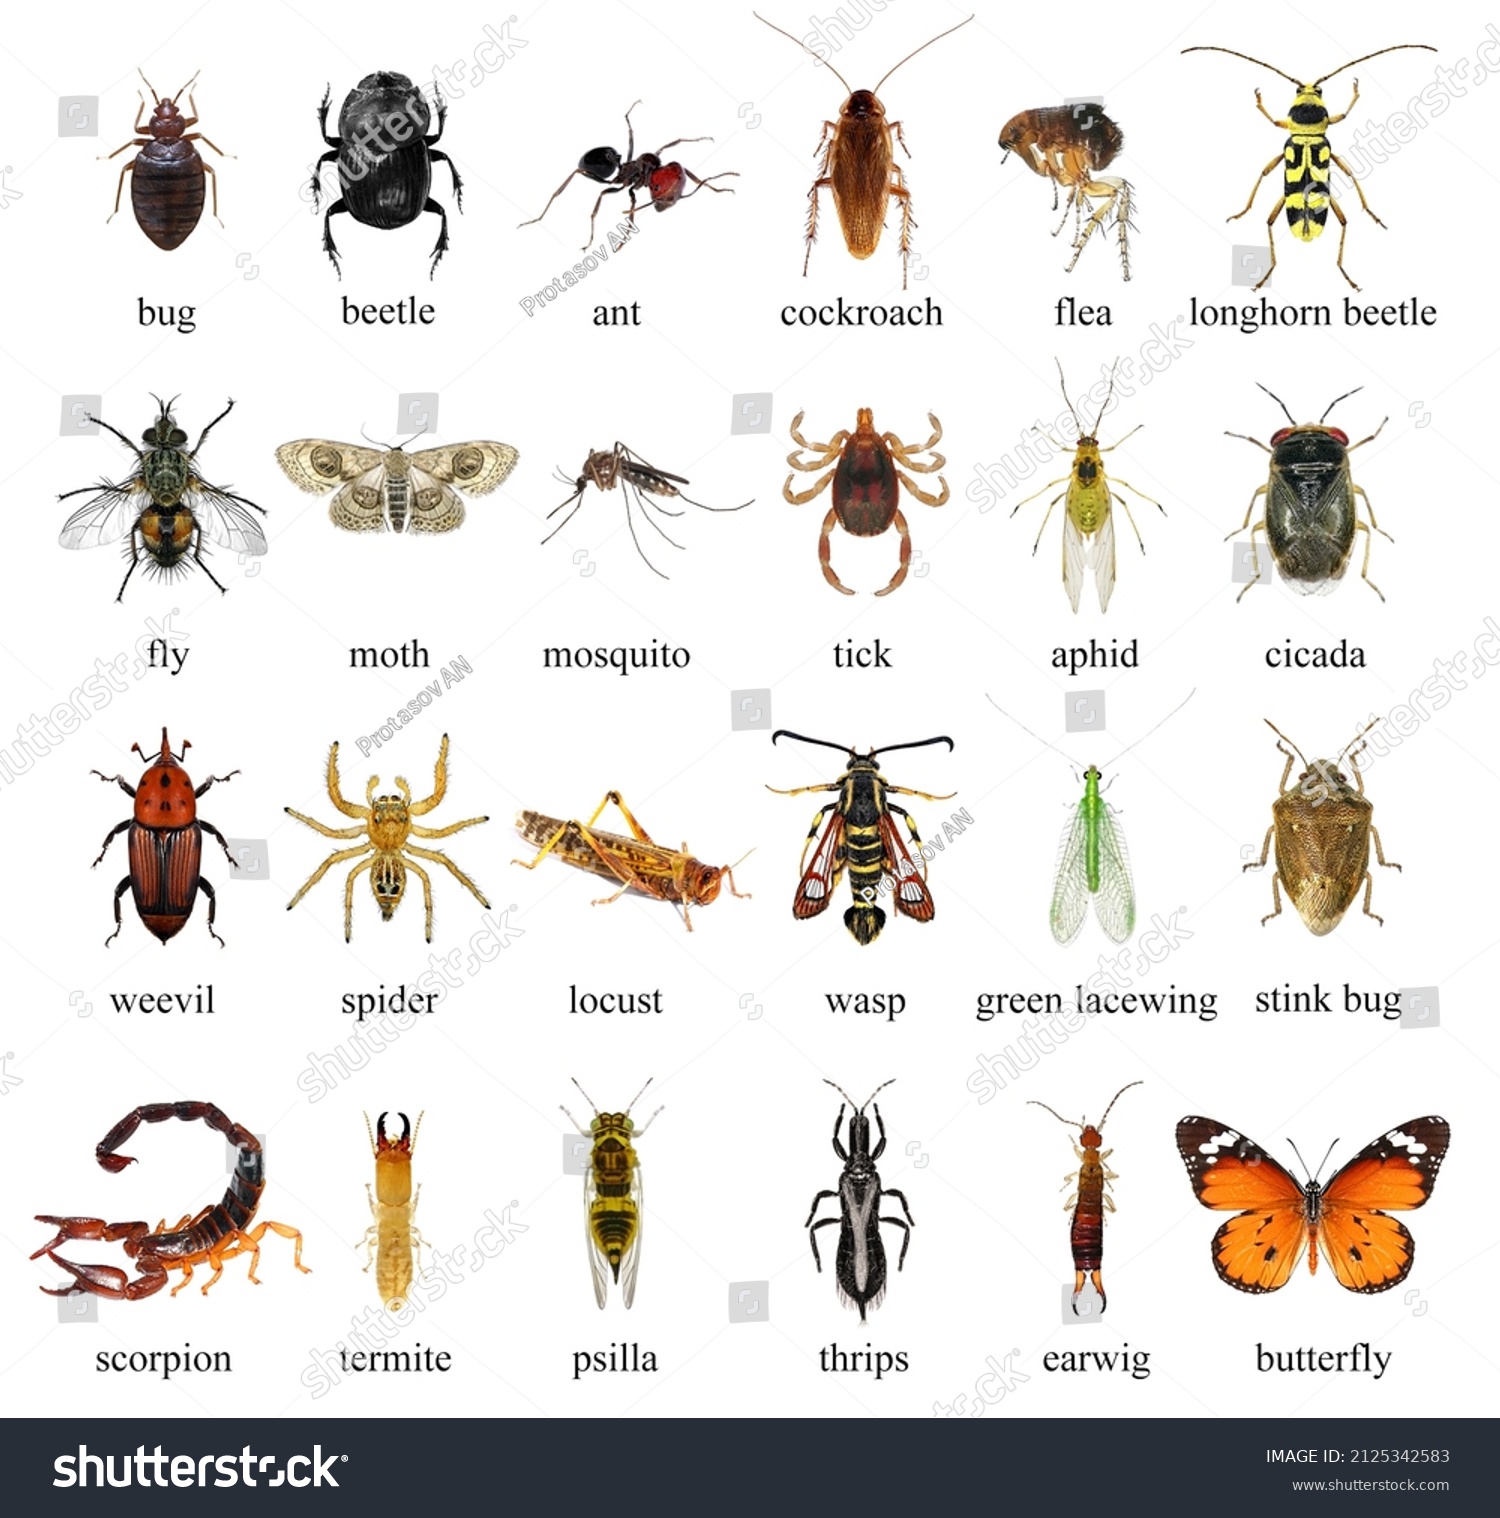 25,040 Diptera insects Images, Stock Photos & Vectors | Shutterstock